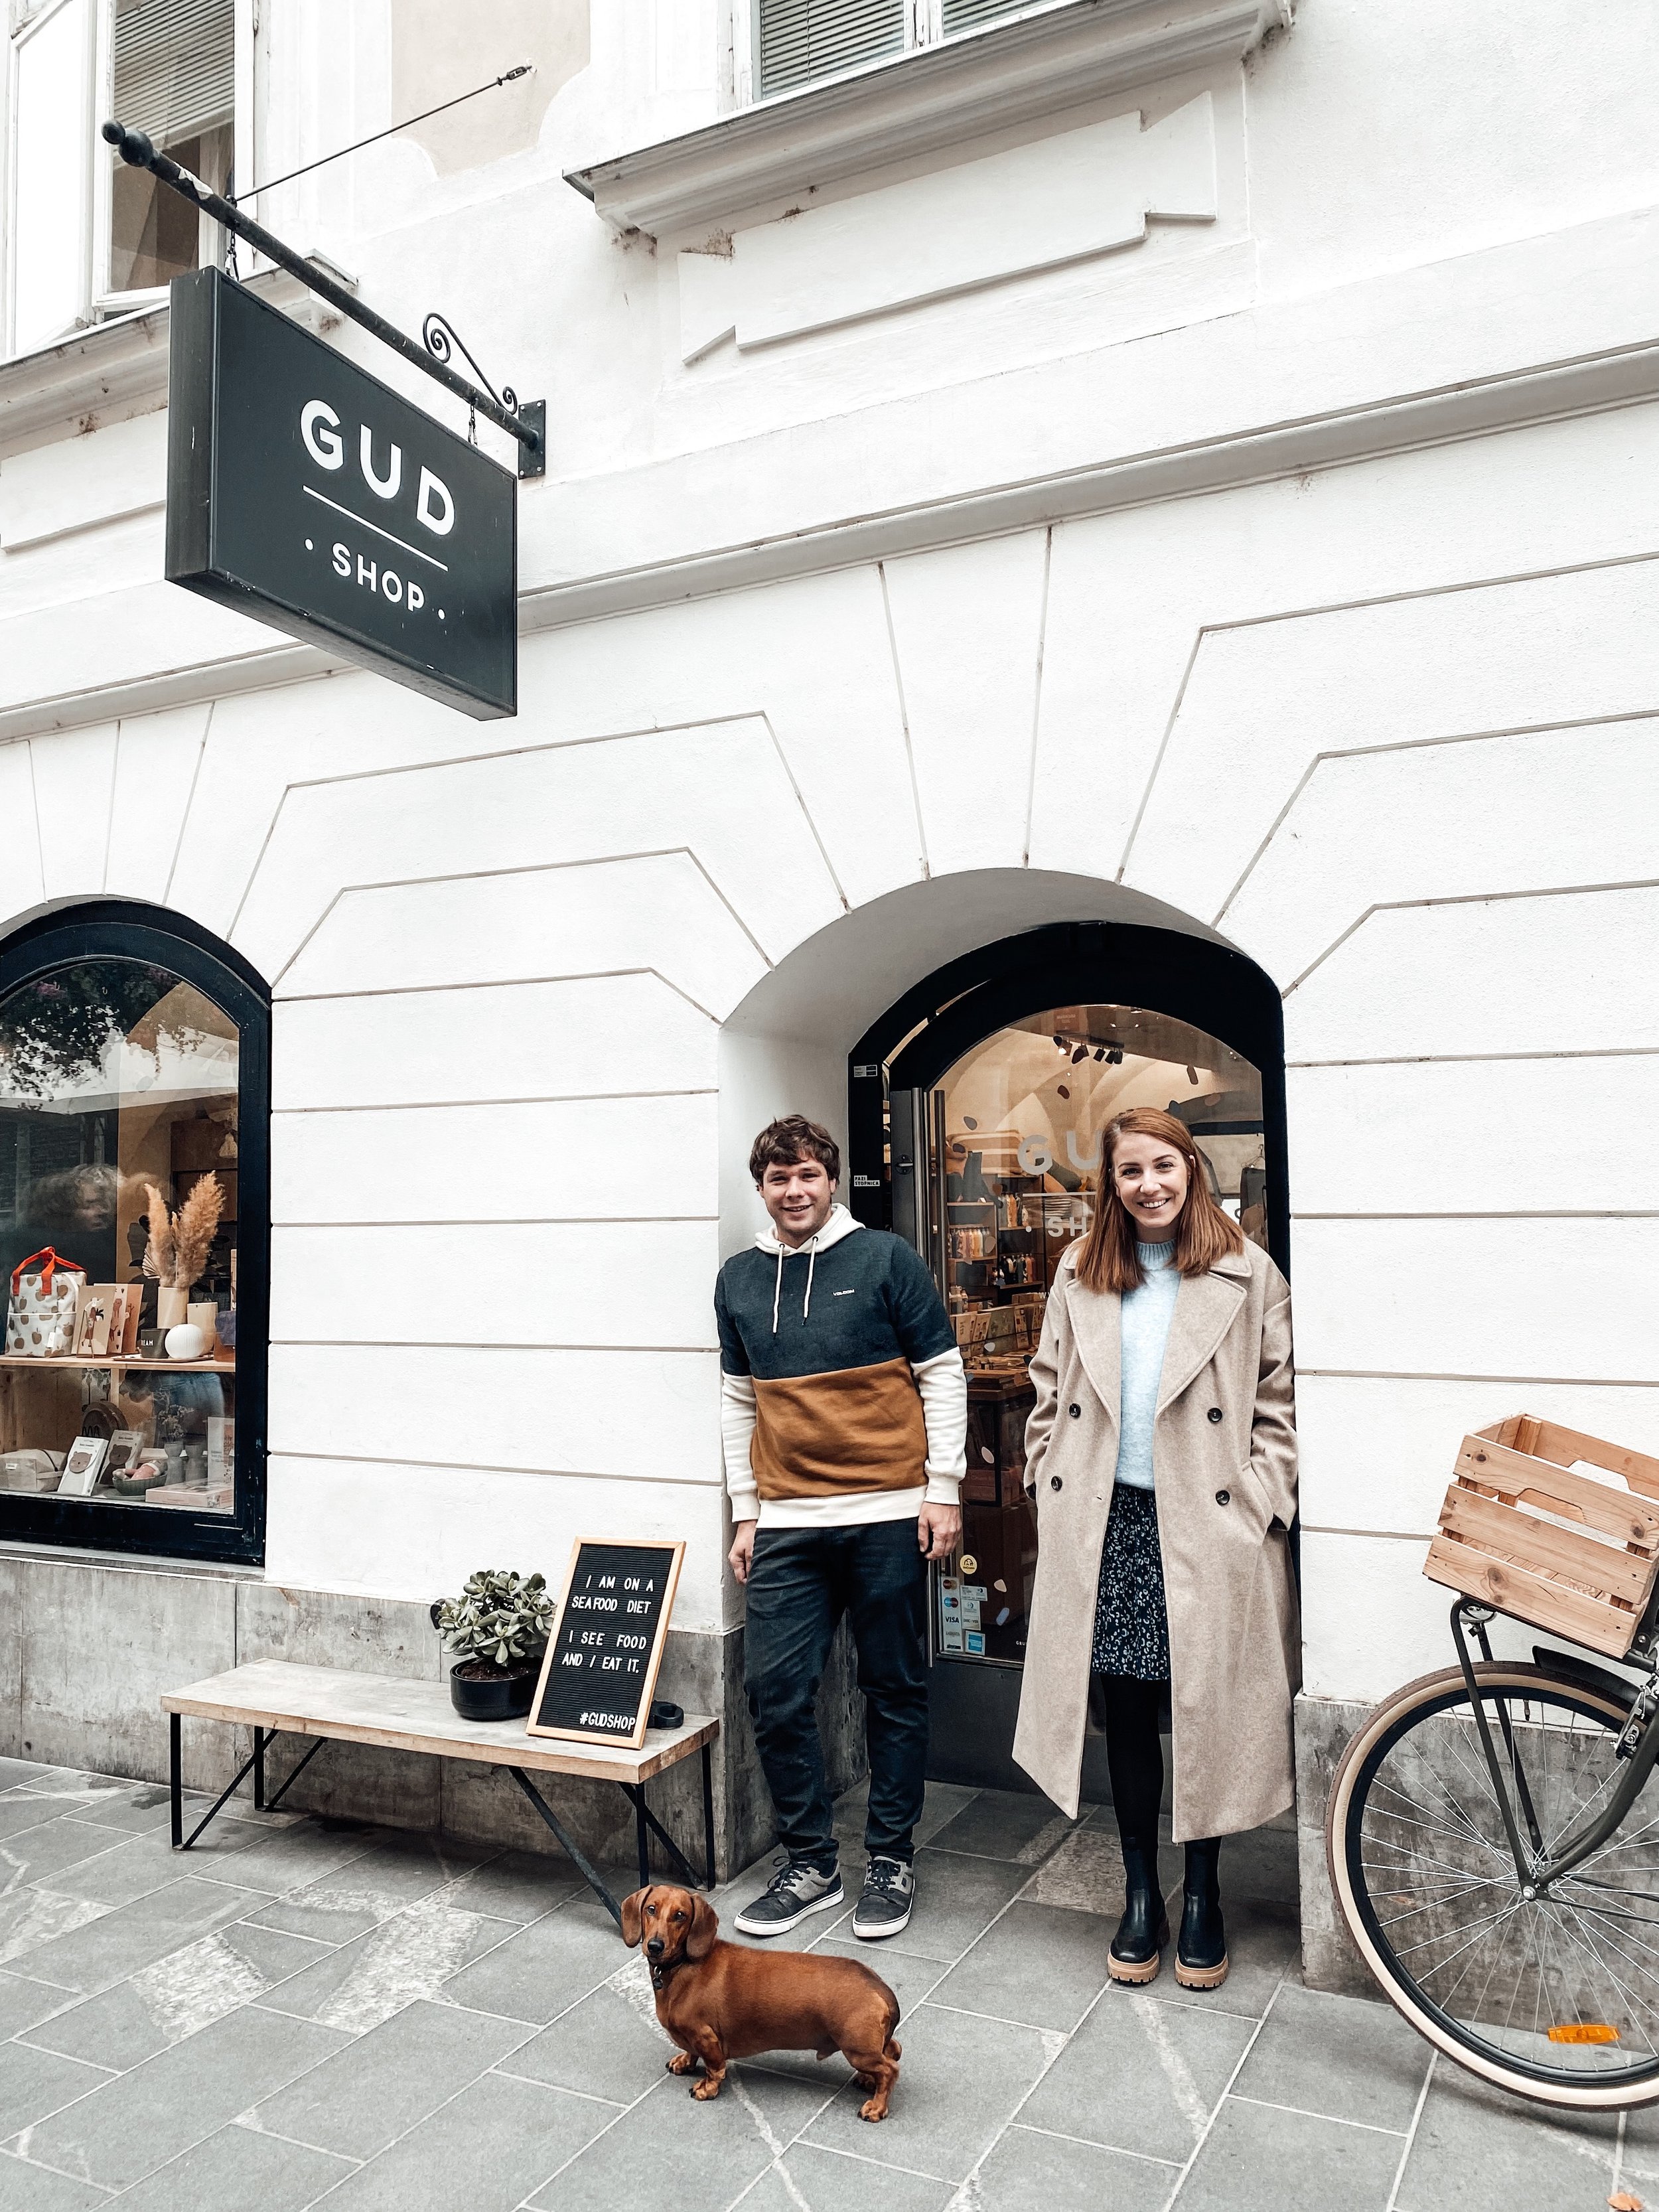 shop owners of Gud Shop in Slovenia with sausage dog